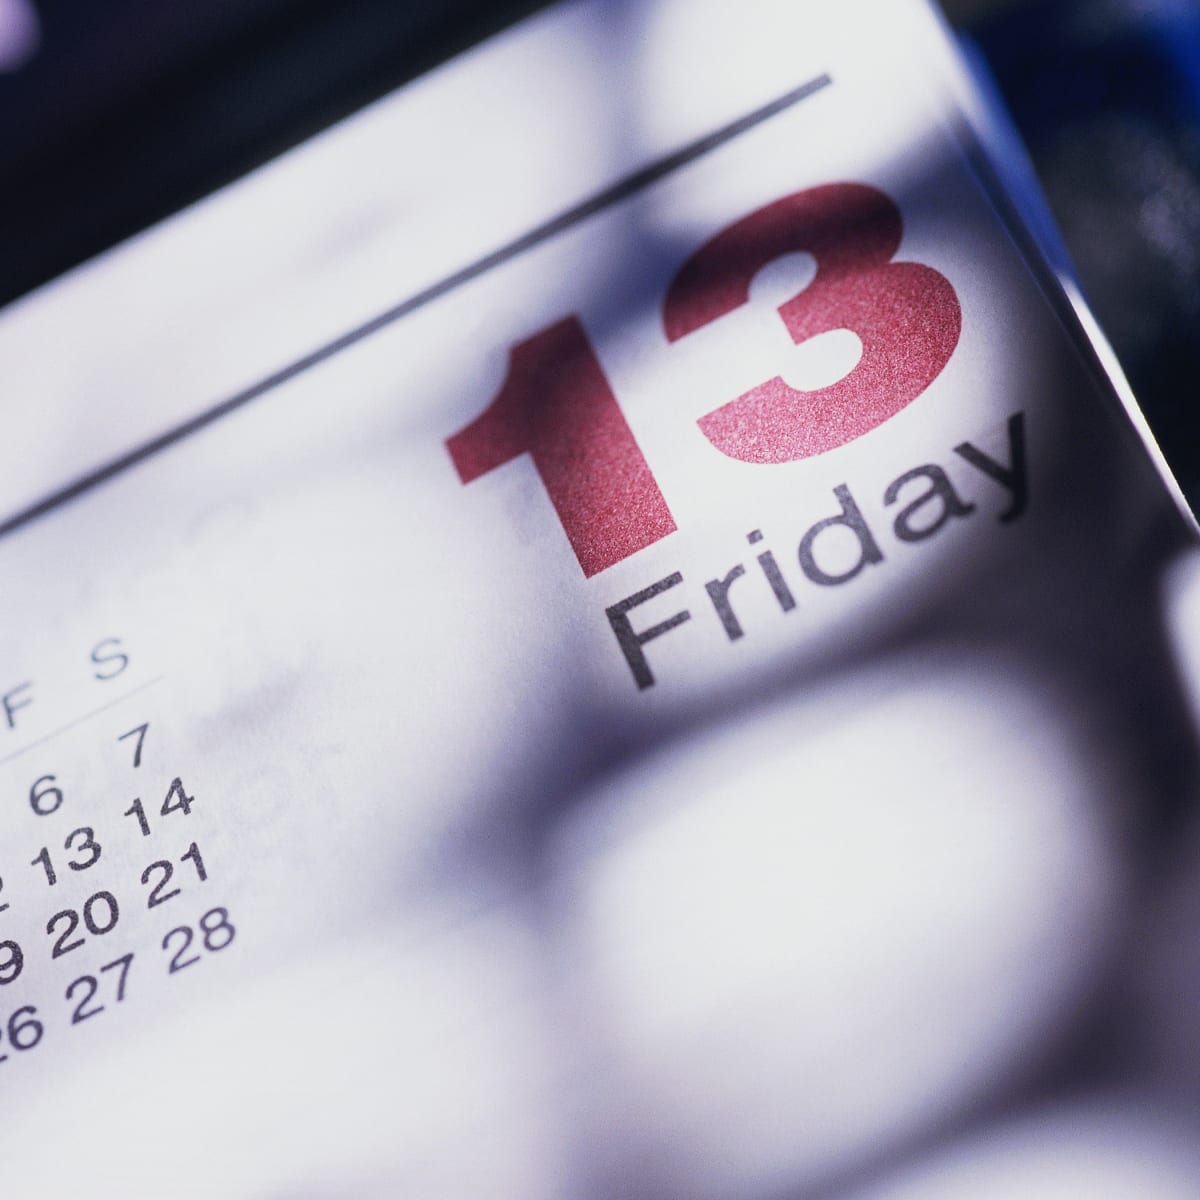 Why is Friday the 13th considered so unlucky?